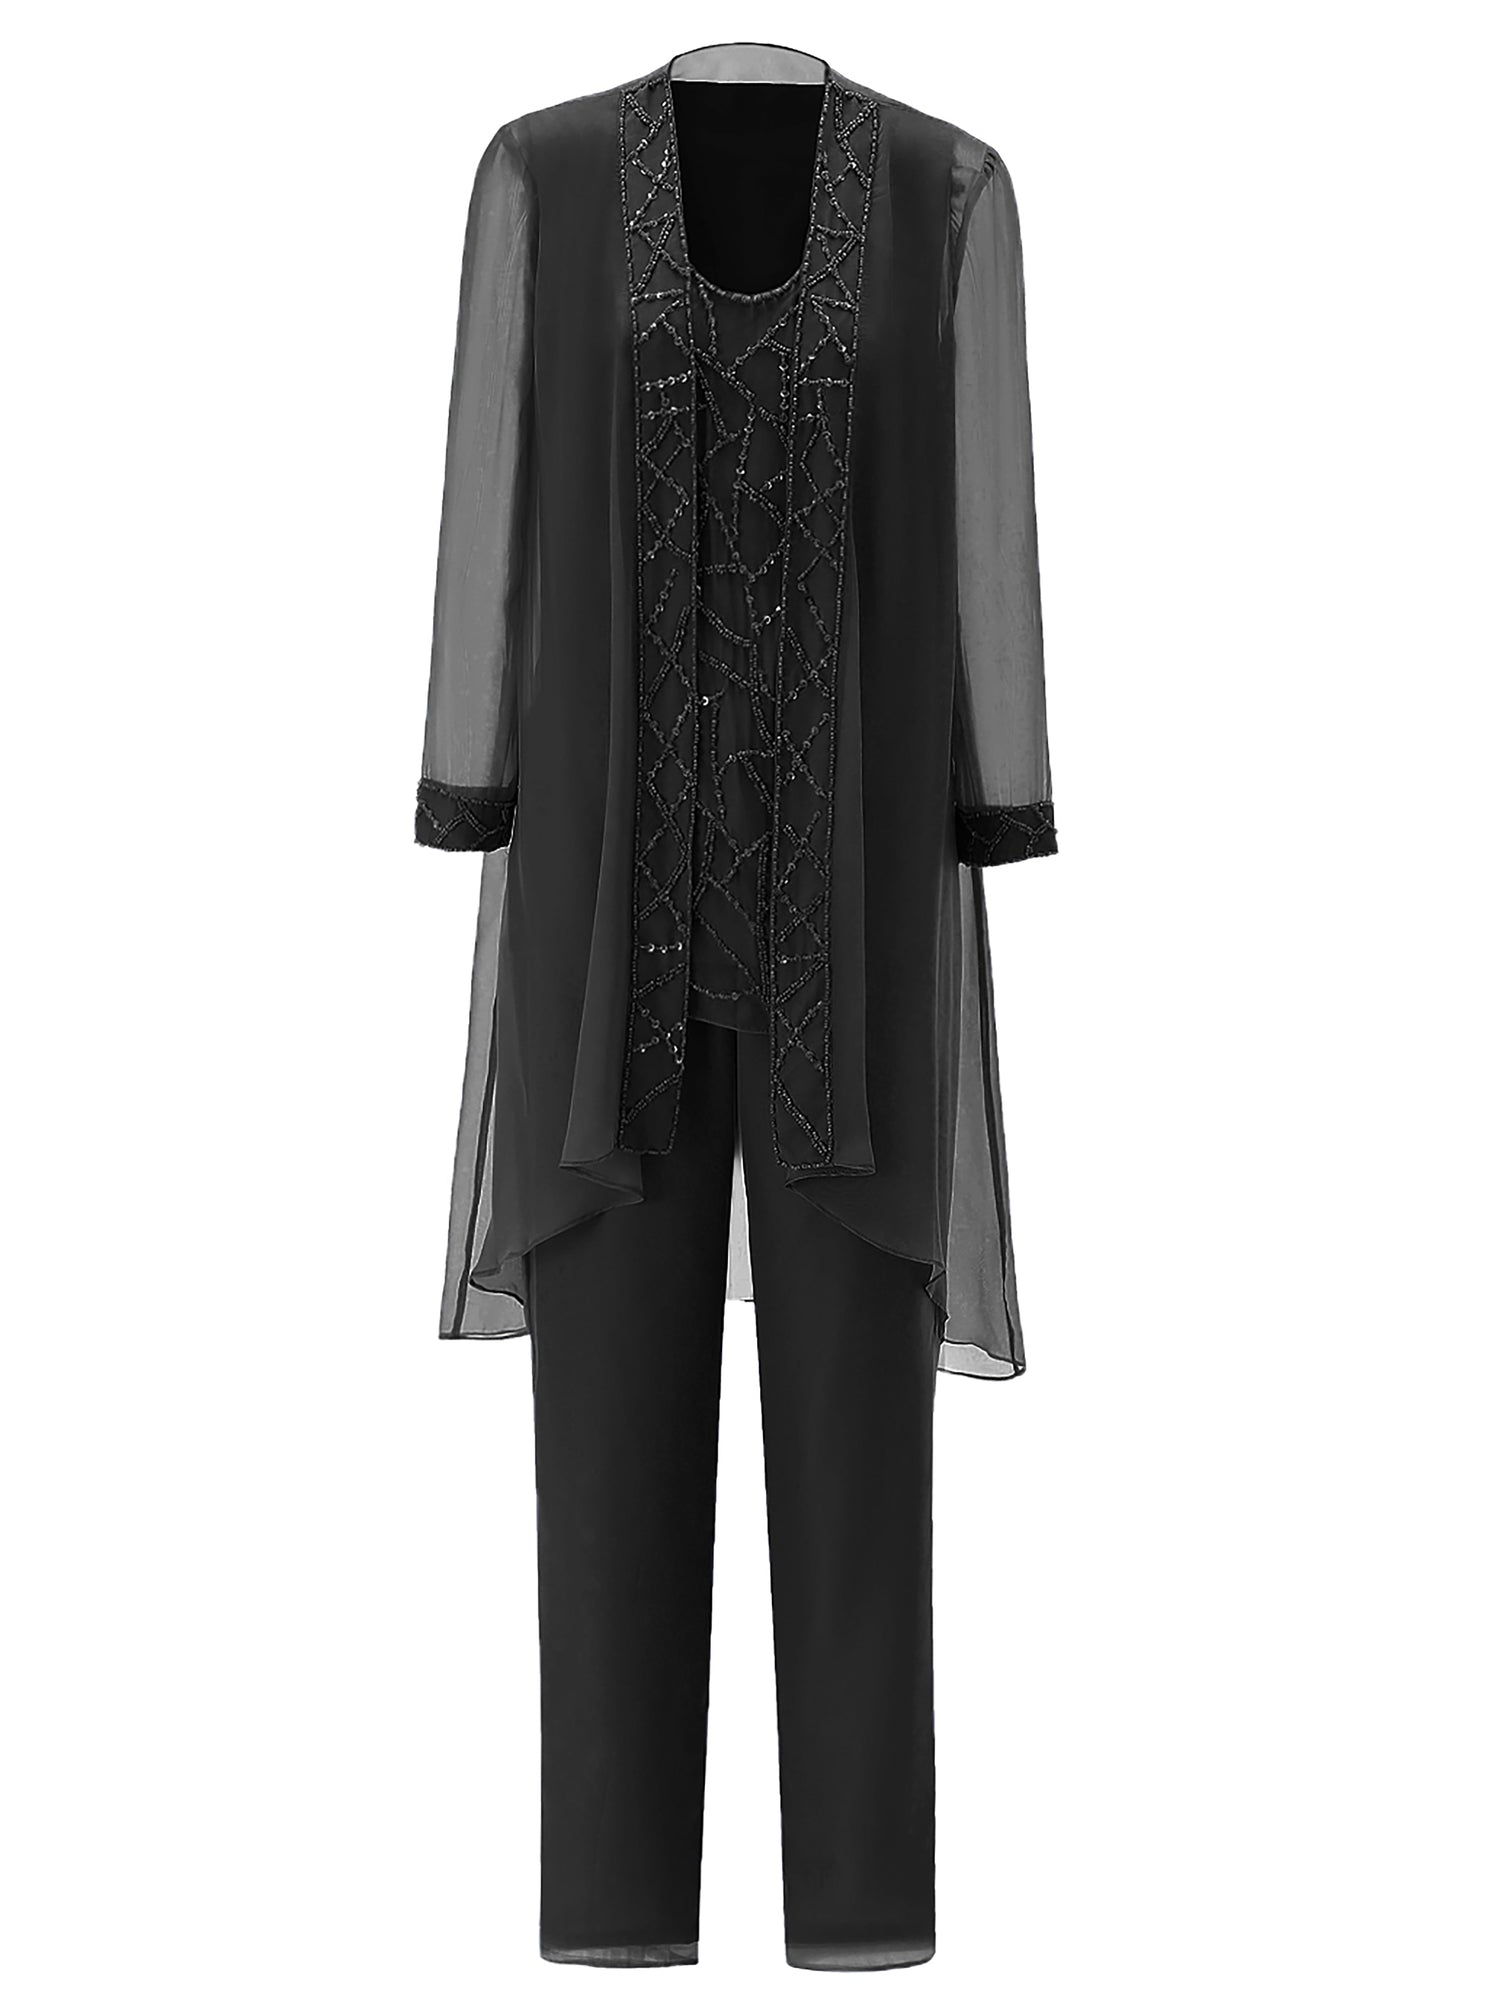 Stylish Black Beaded Chiffon Mother Of Bride Pantsuits For Wedding Long  Sleeve Formal Outfit, Plus Size Evening Gown For Mother And Groom From  Newdeve, $79.23